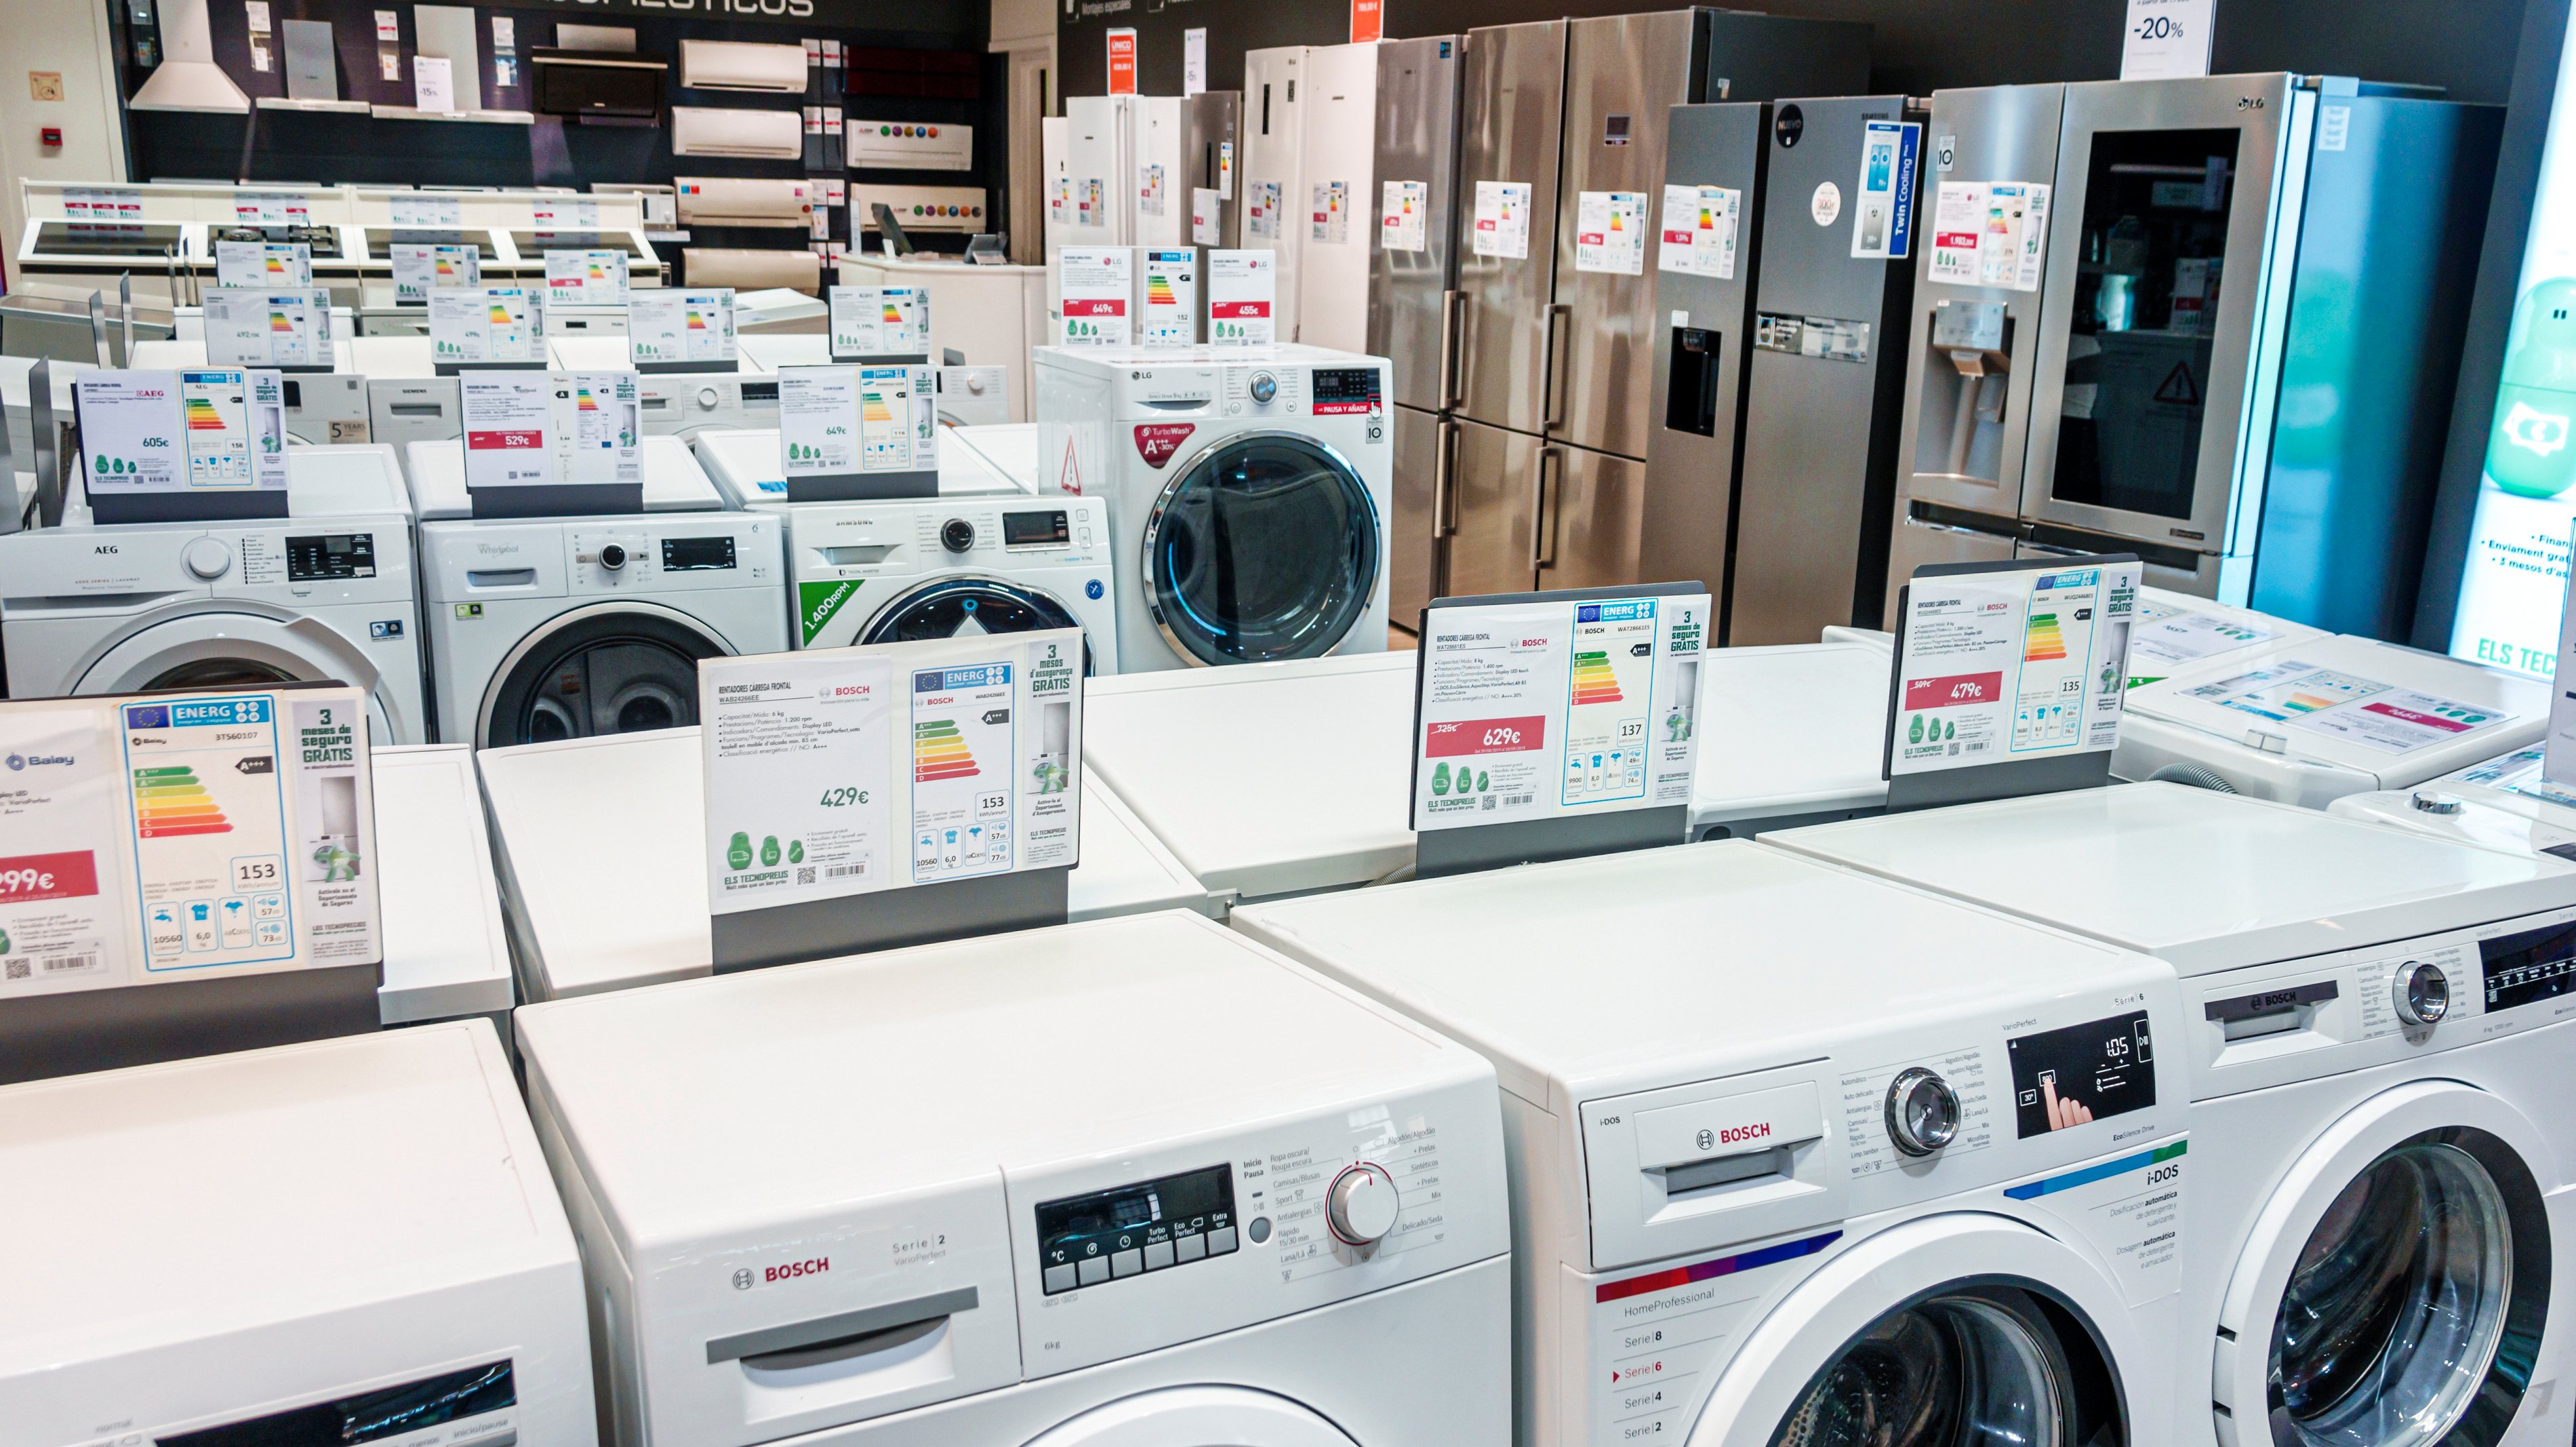 Spain, Barcelona, El Corte Ingle, department store appliances, washers, dryers and refrigerators